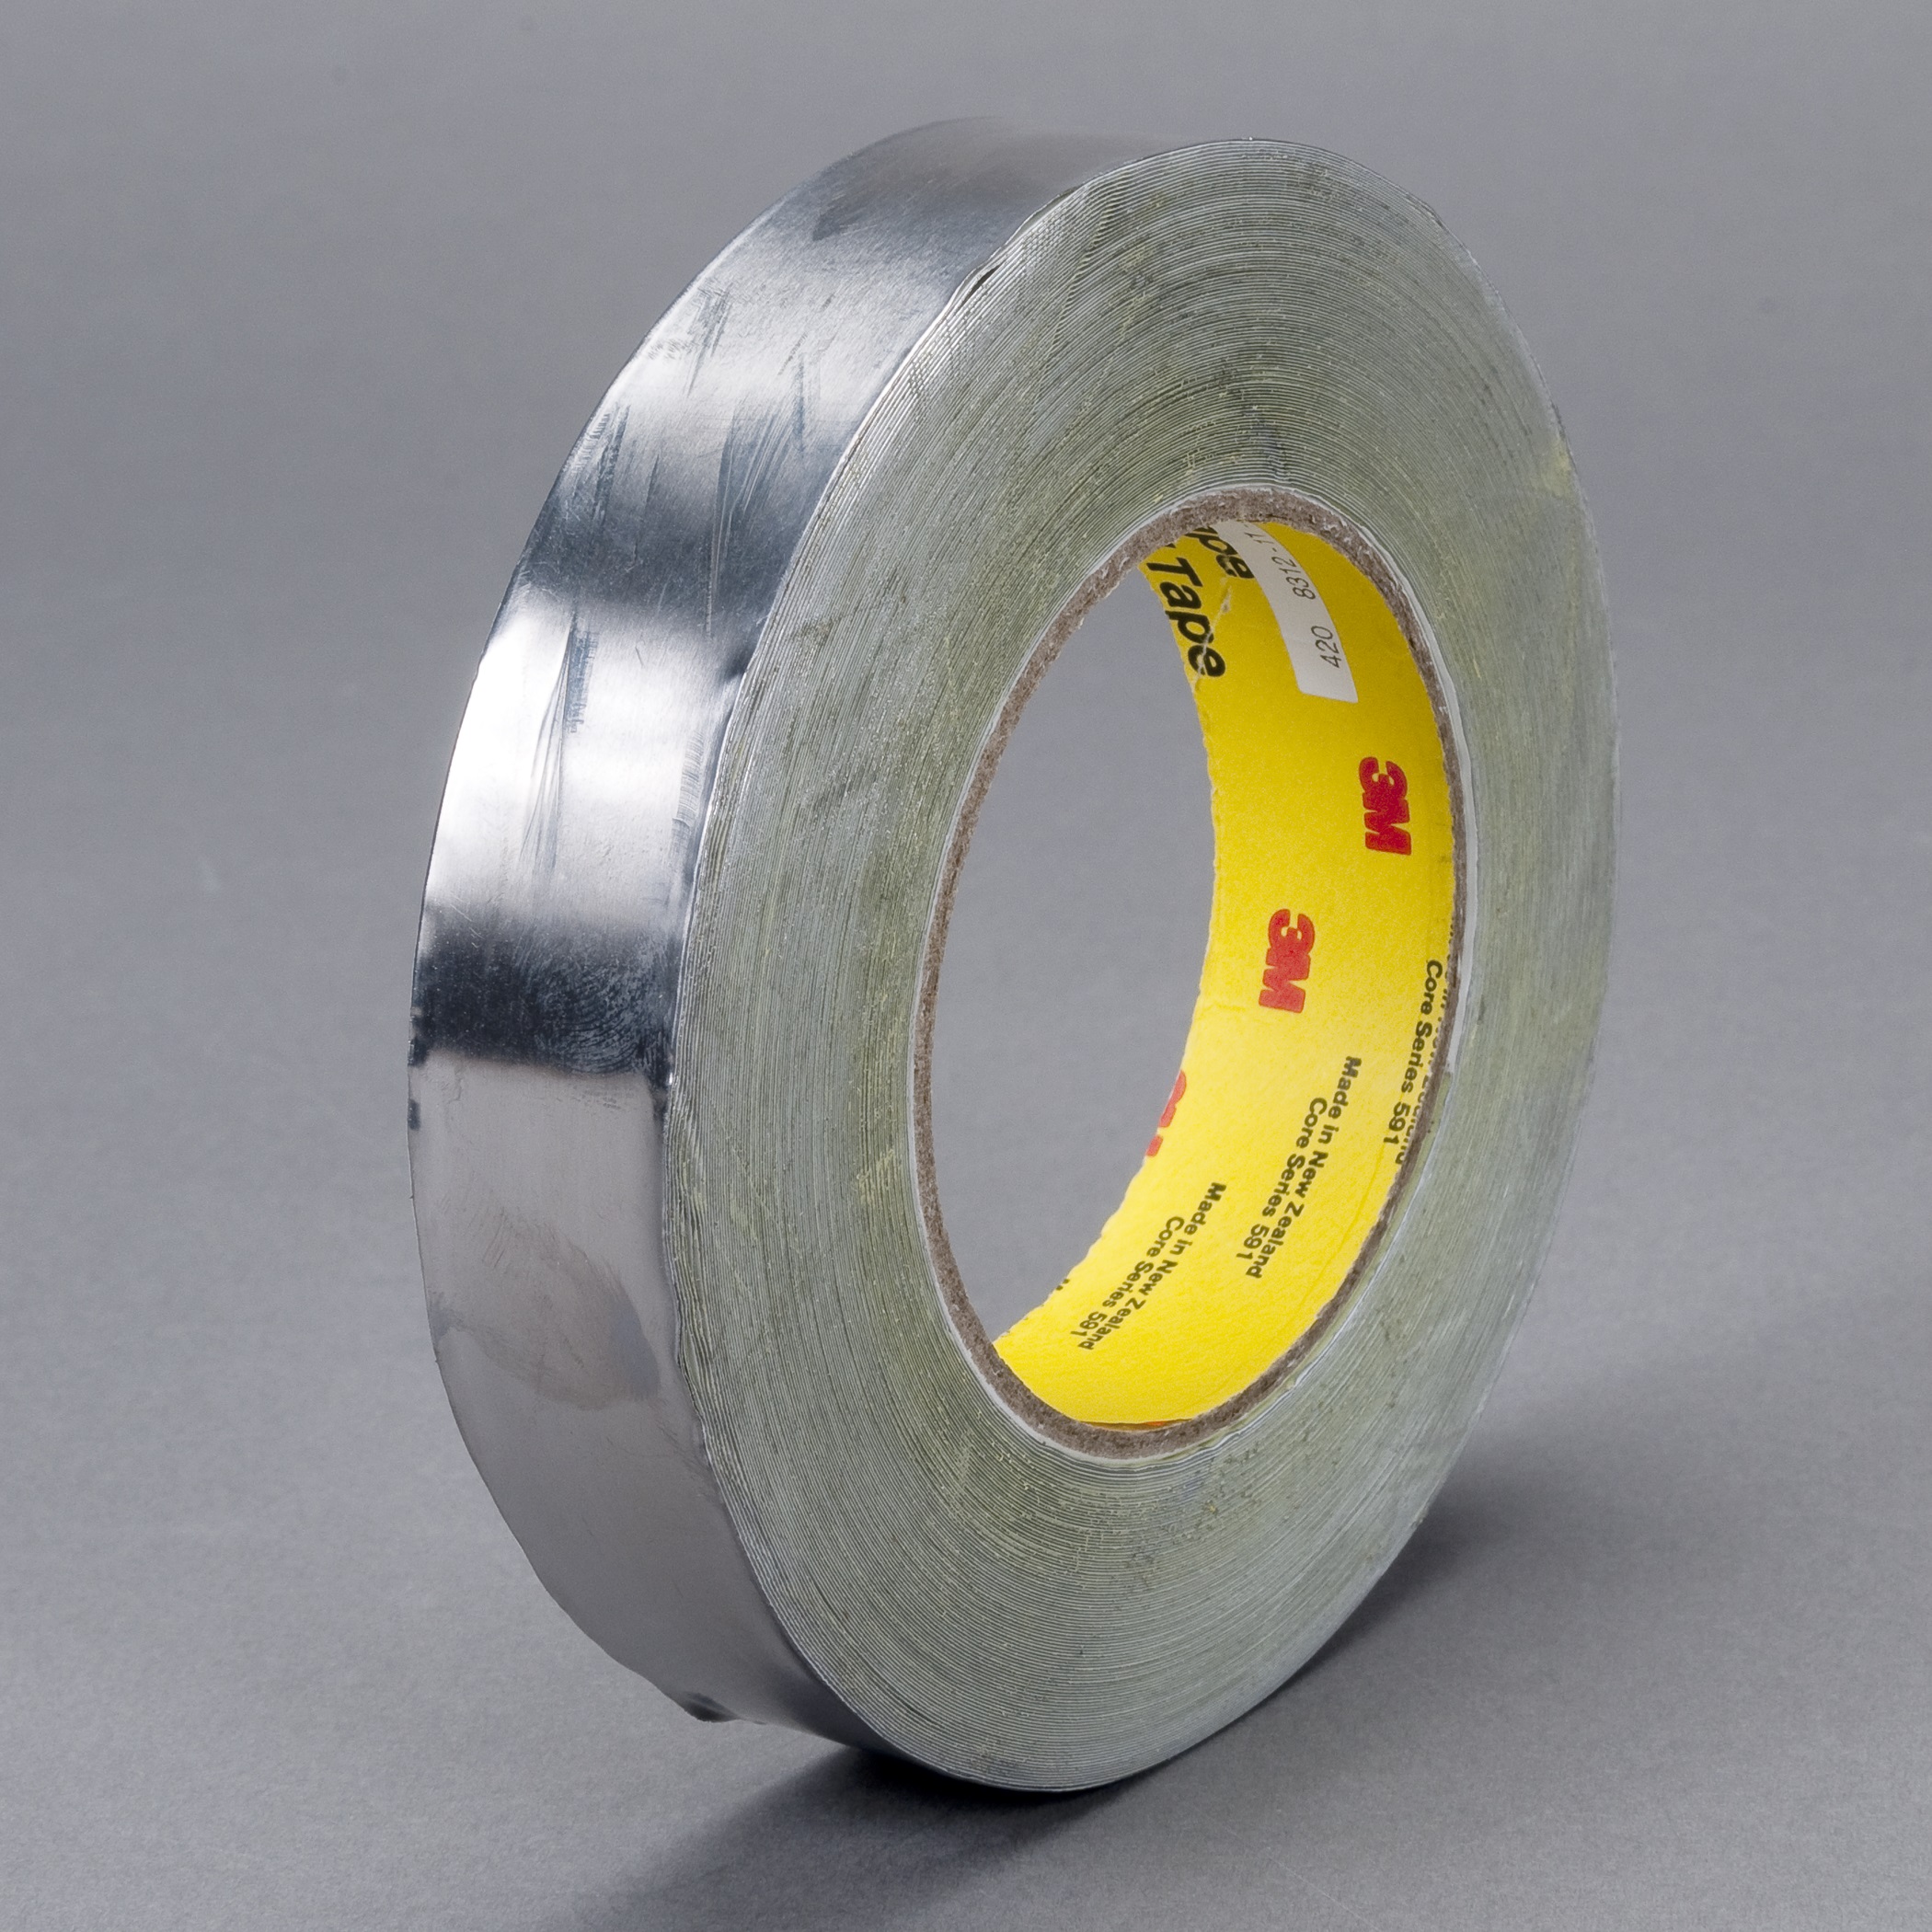 3M™ 051138-95413 Foil Tape, 36 yd L x 1 in W, 6.8 mil THK, Easy Release Film Liner, Rubber Adhesive, Lead Foil Backing, Dark Silver